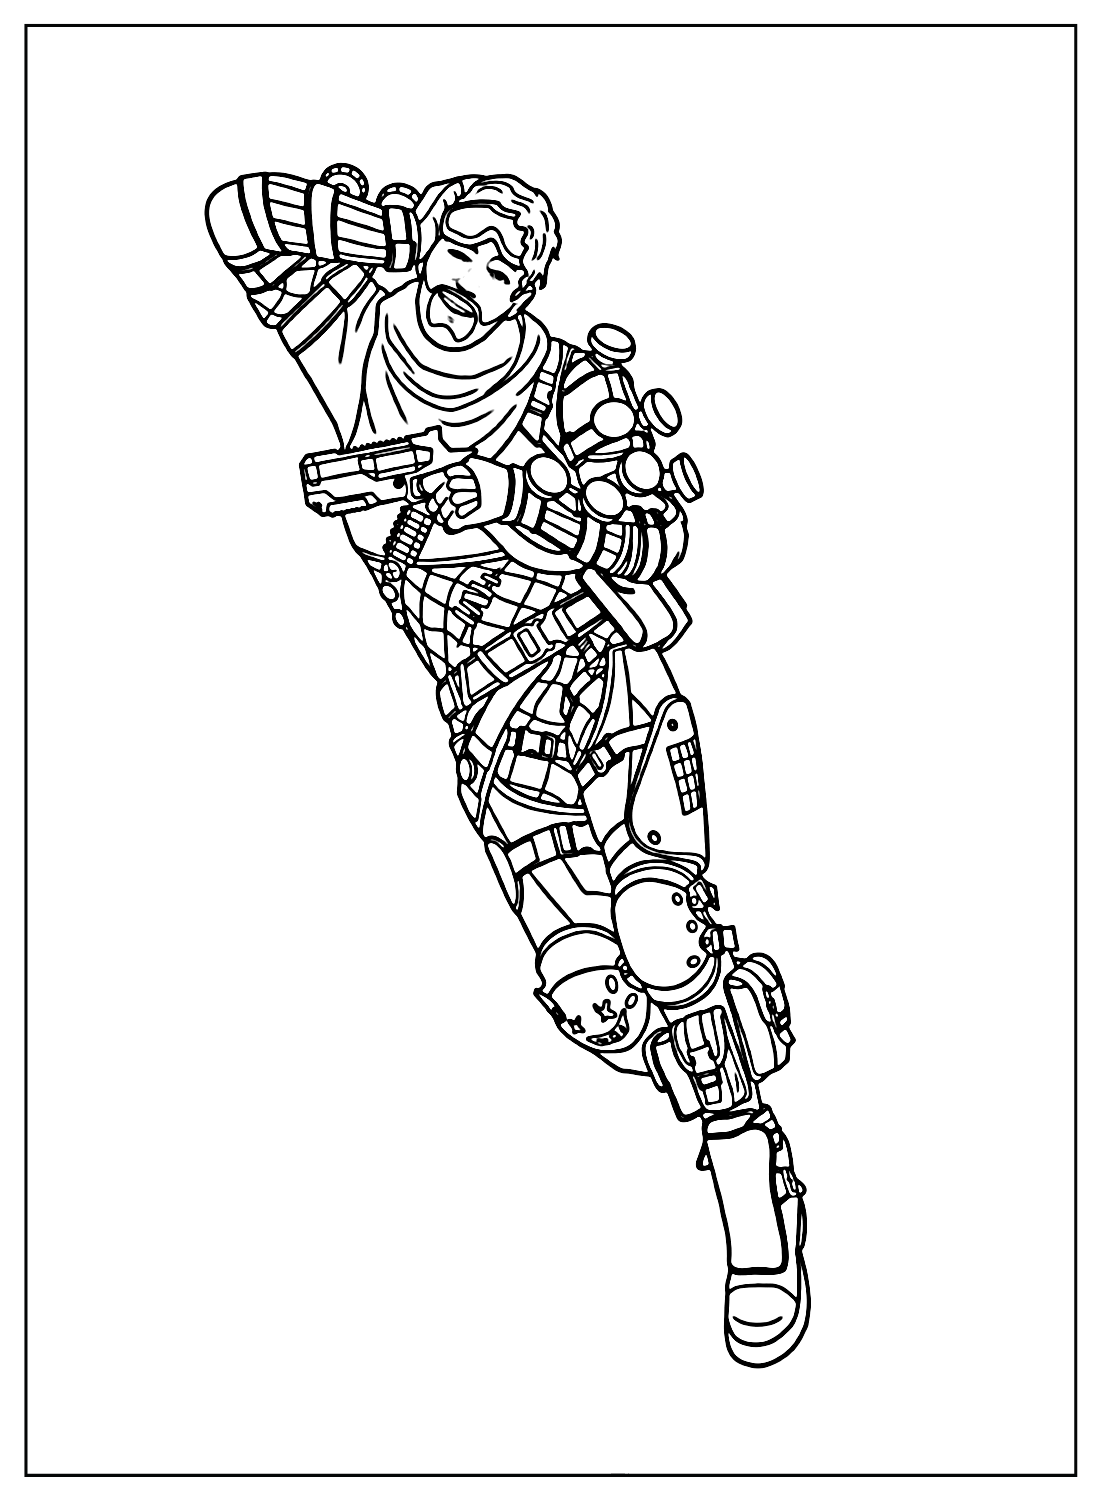 Free Coloring Pages Apex Legends from Apex Legends